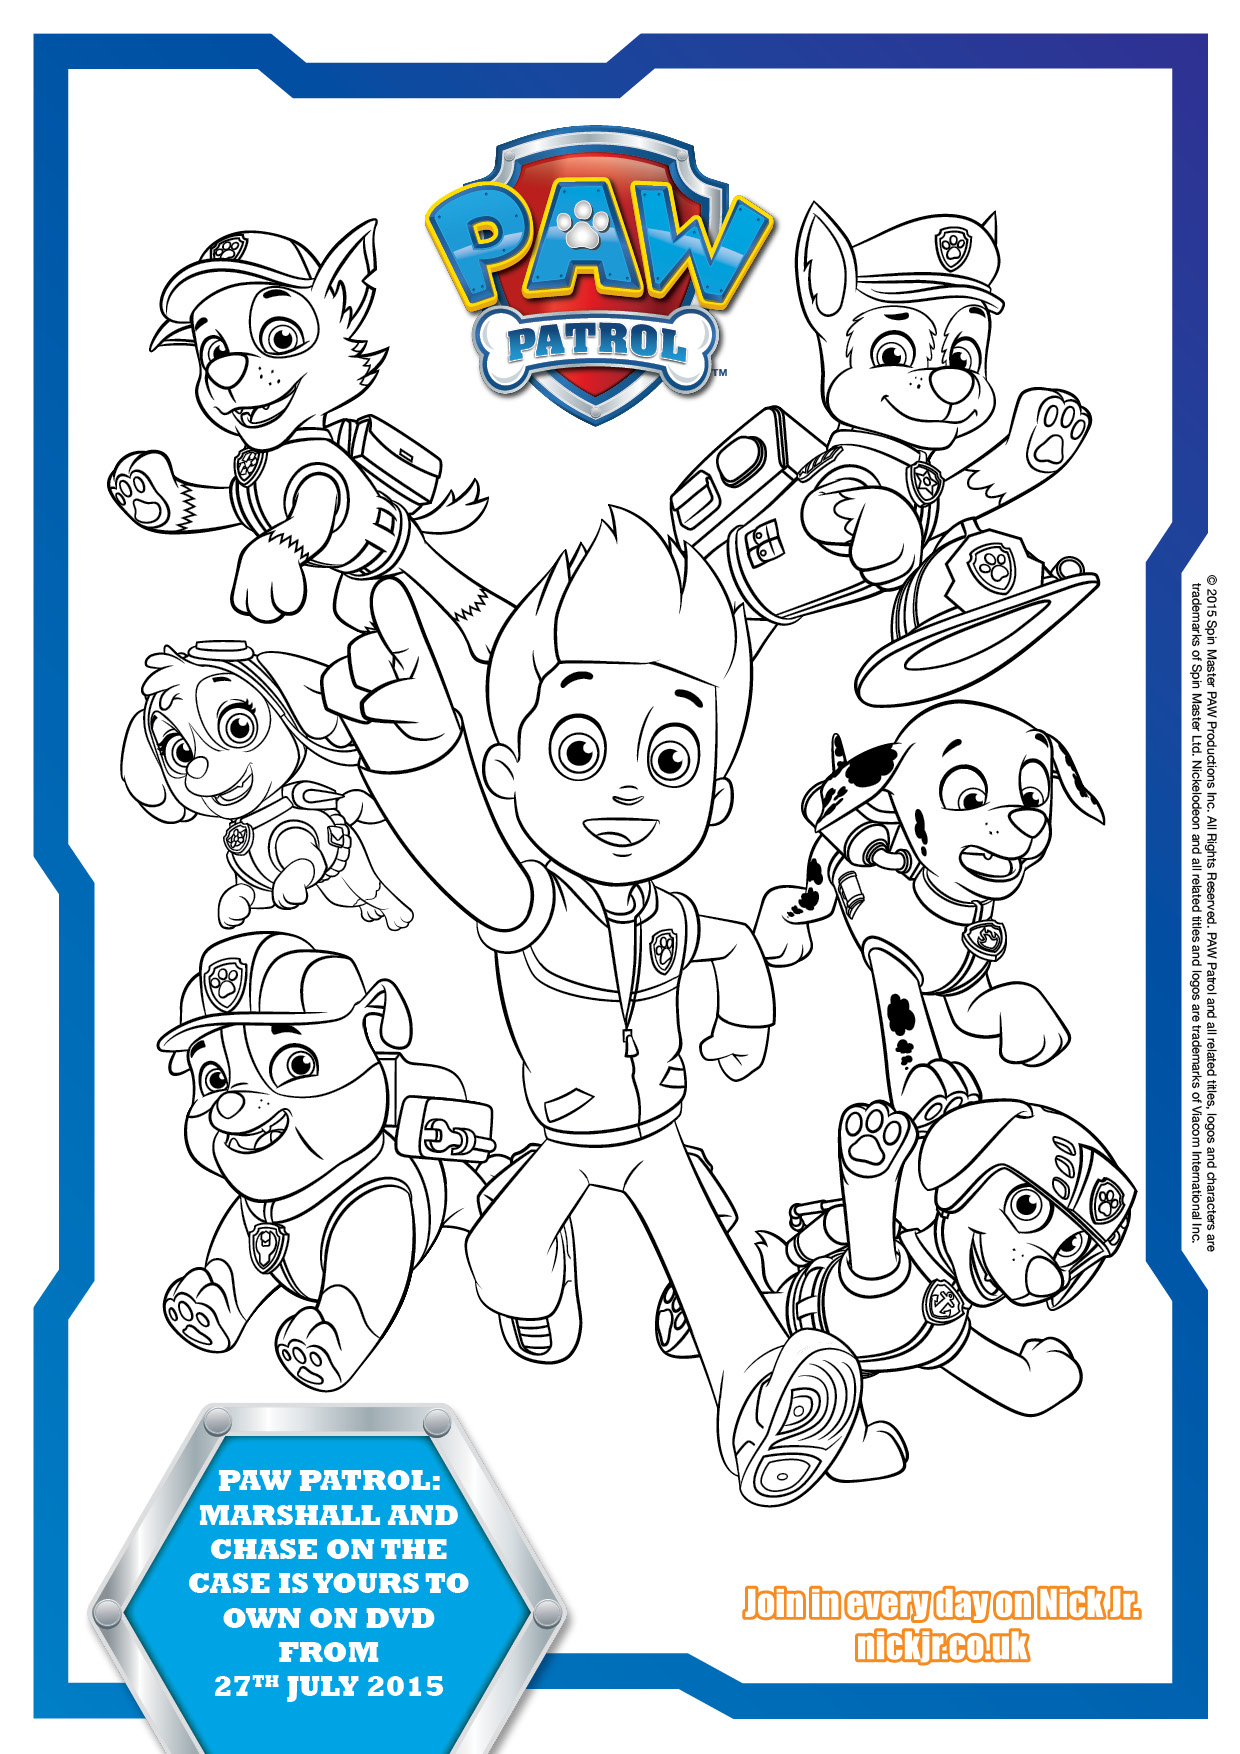 Paw patrol louring pages and activity sheets free printables